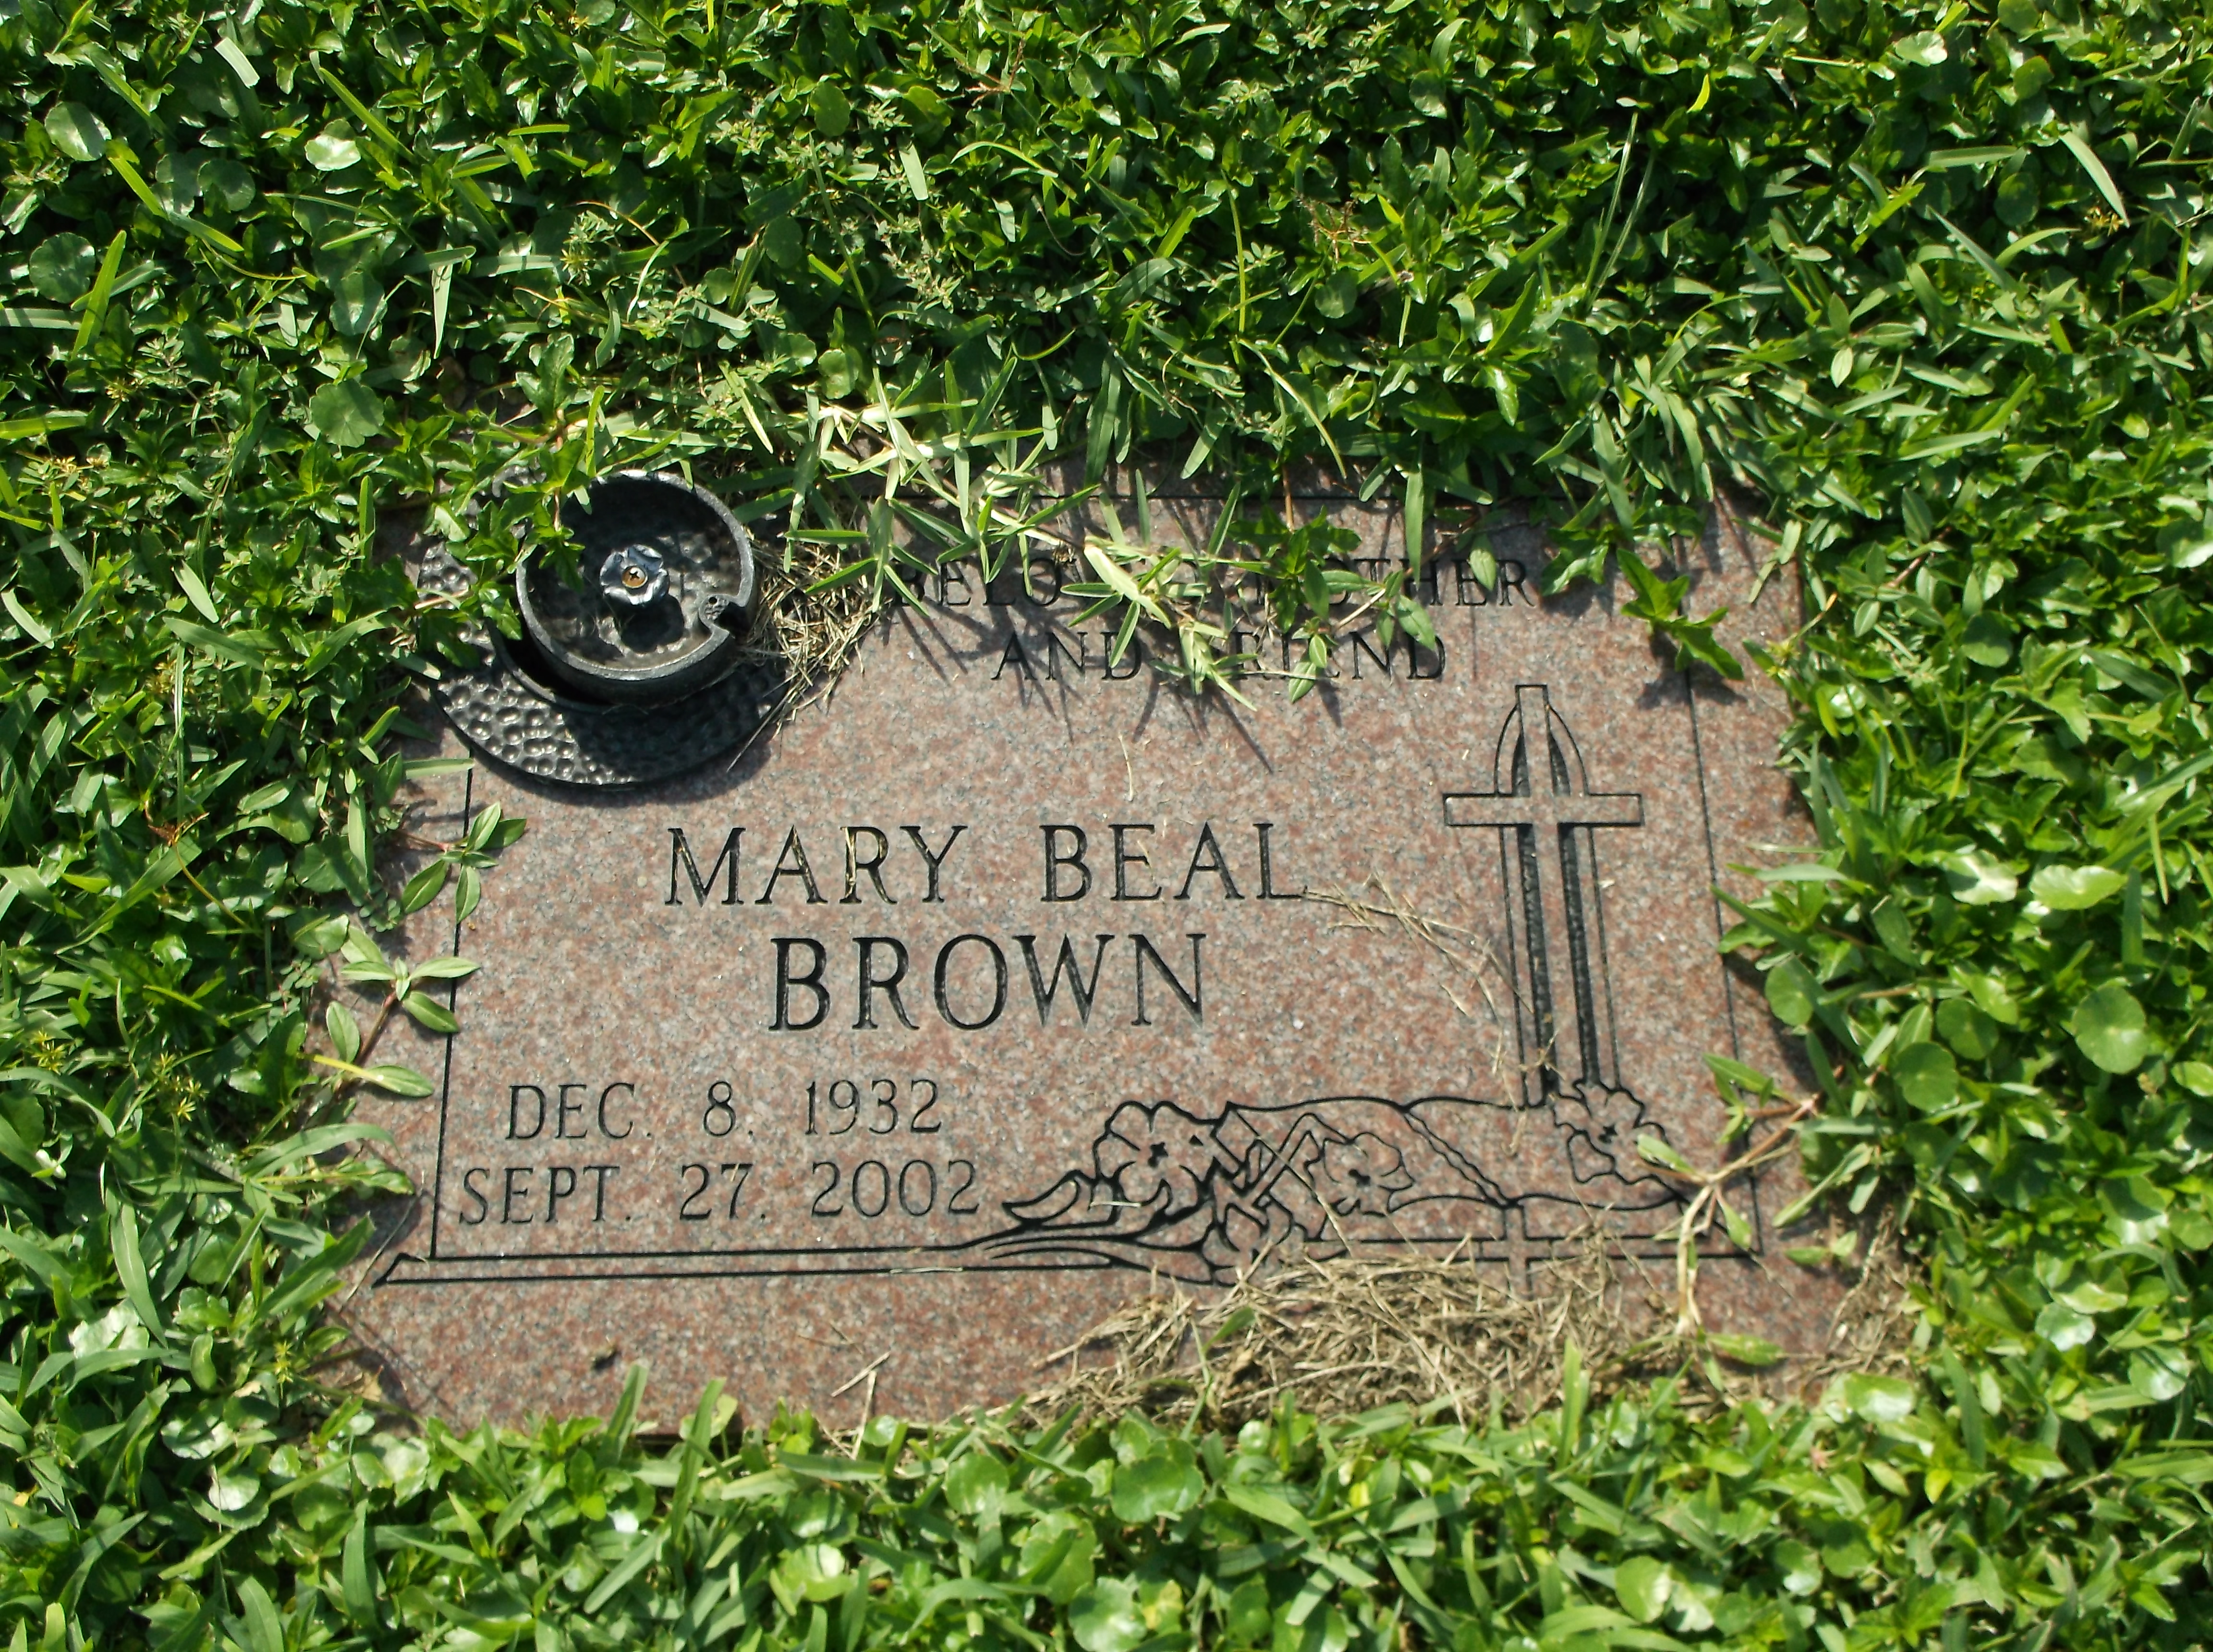 Mary Beal Brown